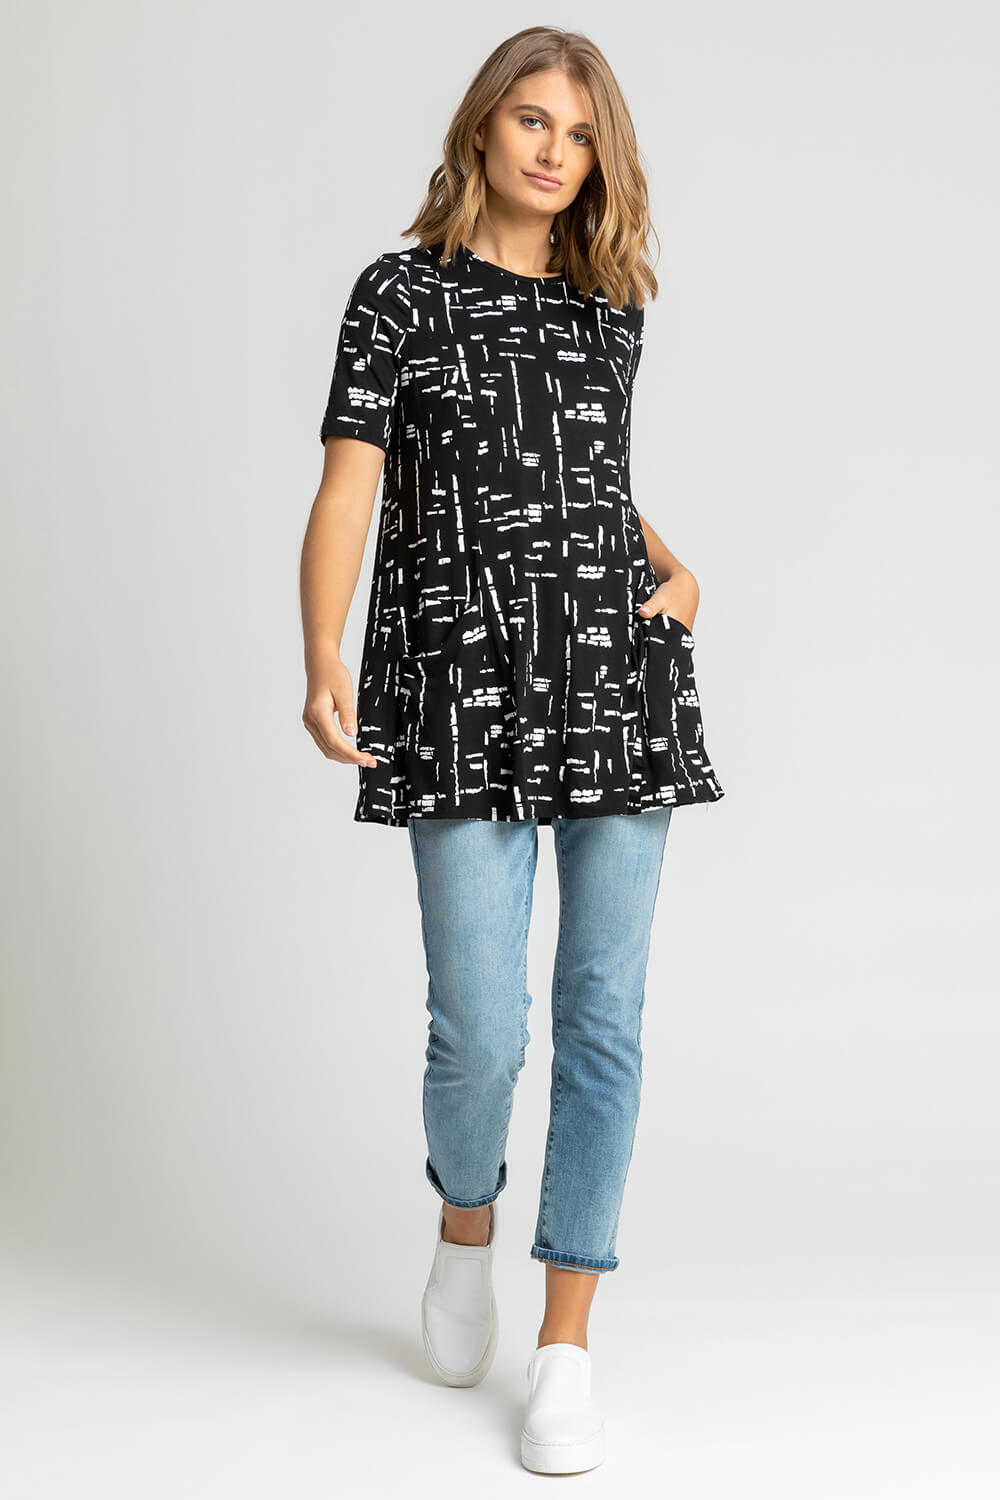 Black Abstract Pocket Stretch Swing Top, Image 3 of 5